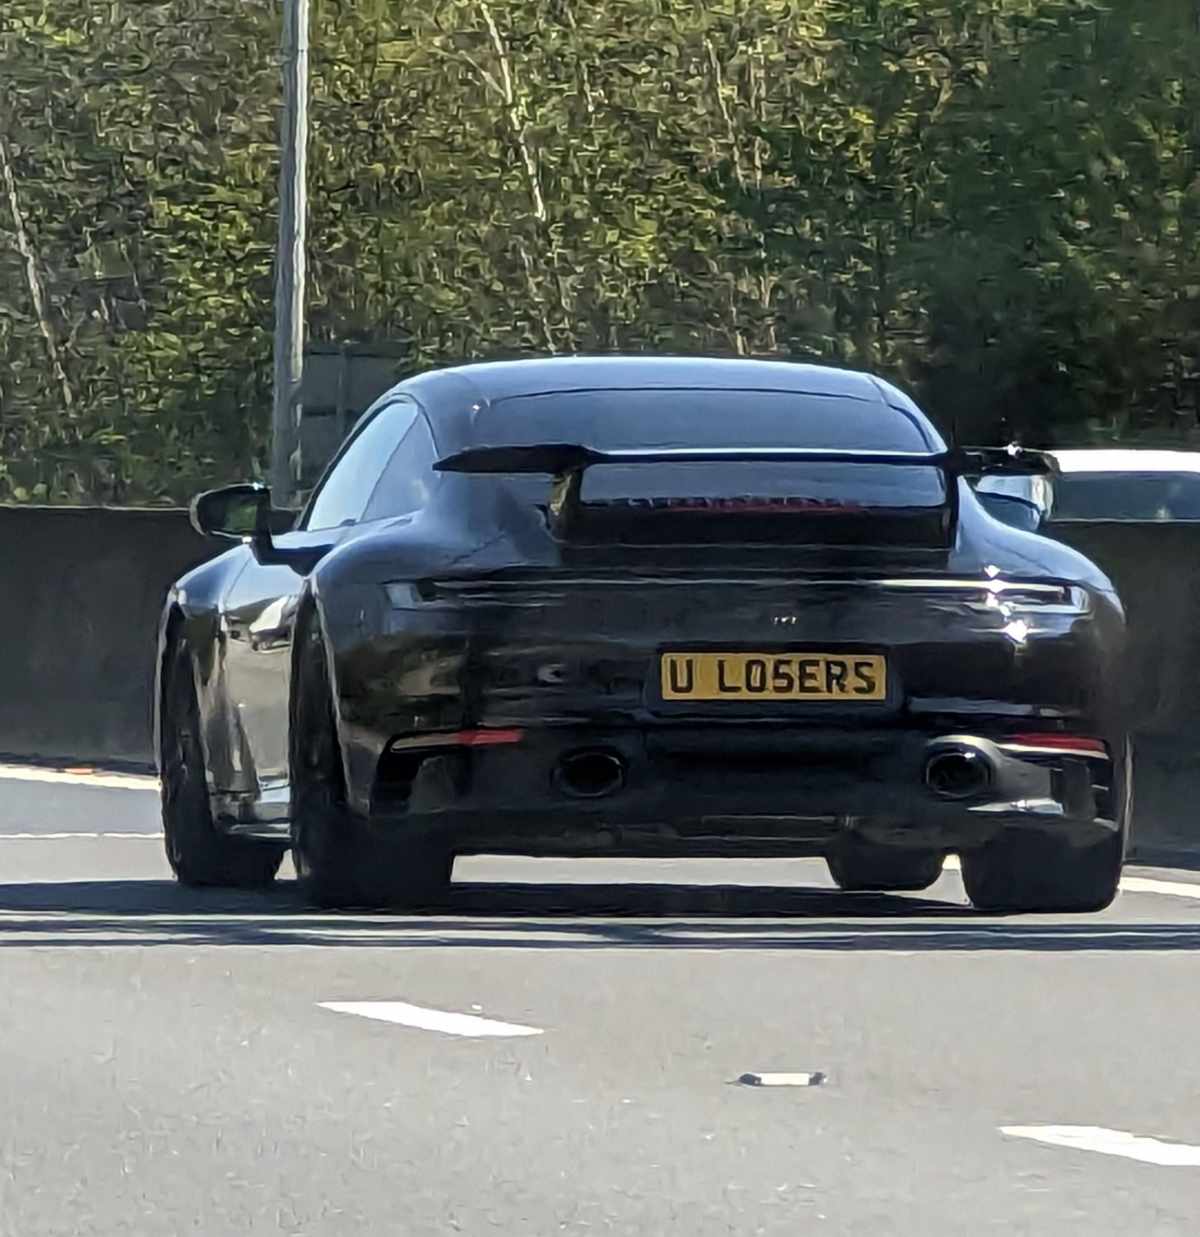 Saw this number plate on the way to London